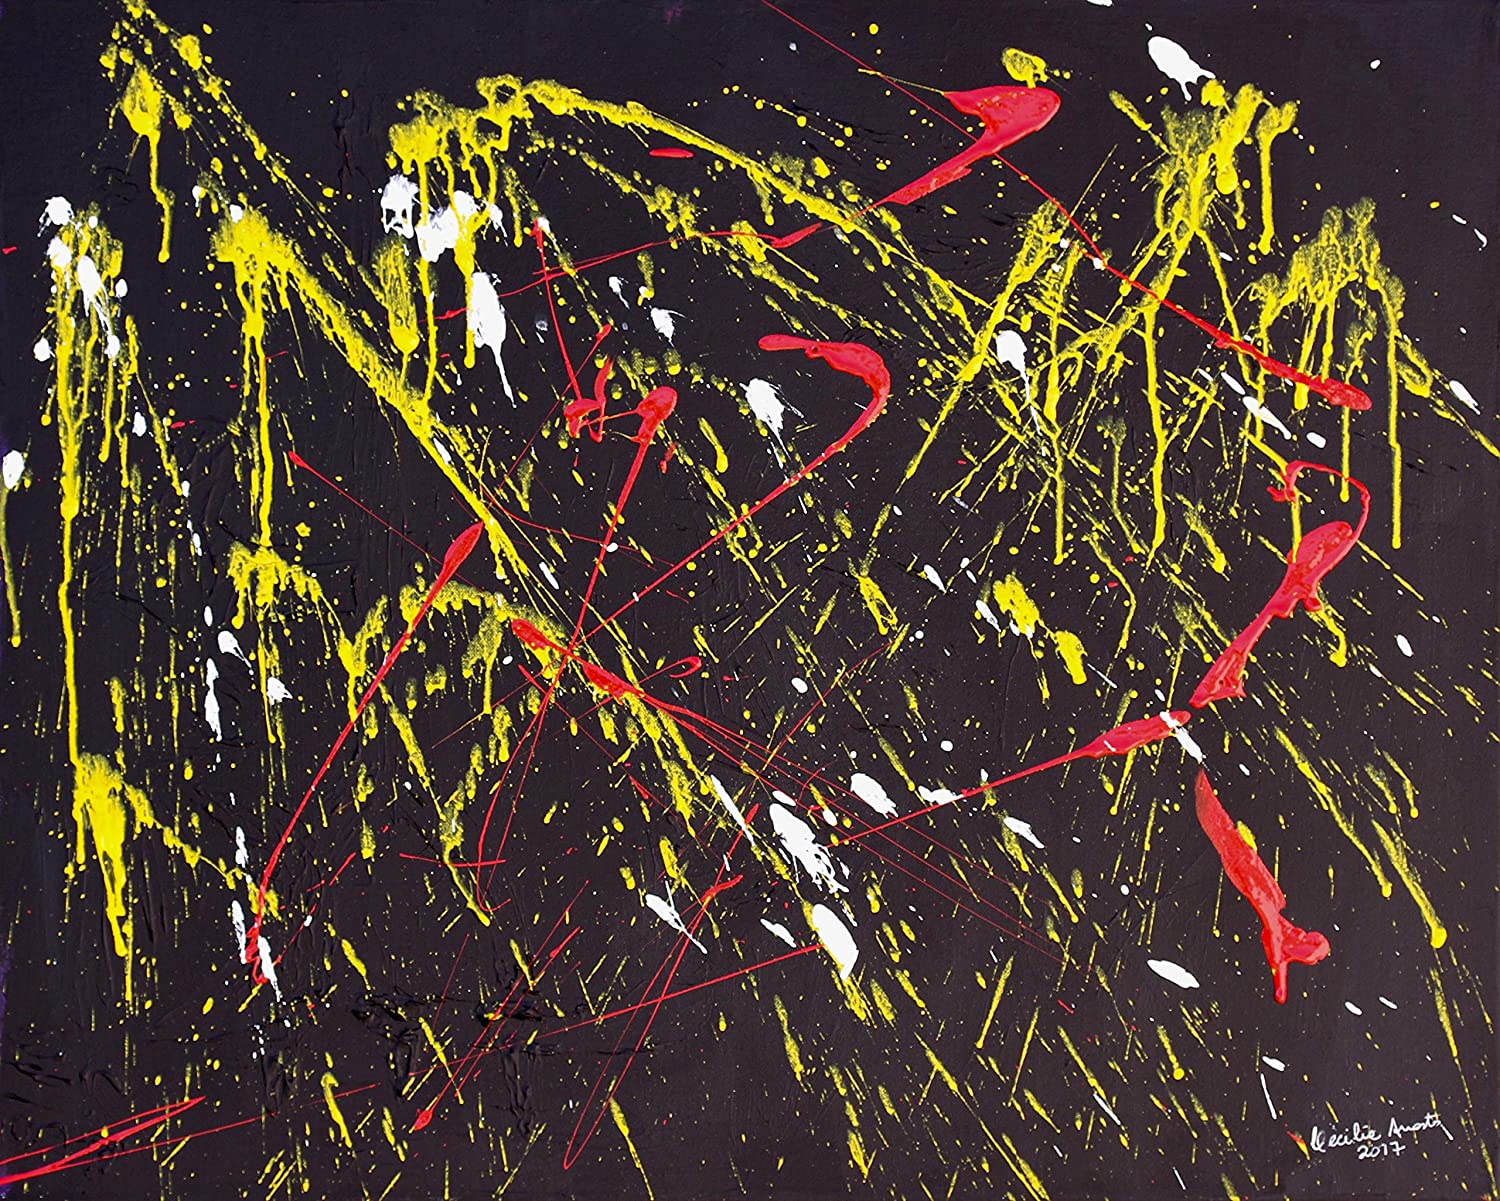 The Splash (2017) on Canvas 30 x 24 Ready to hang Black background with yellow, red and white splashed paint. ​Handmade by USA Artist. Abstract painting. Contemporary artwork. Ready